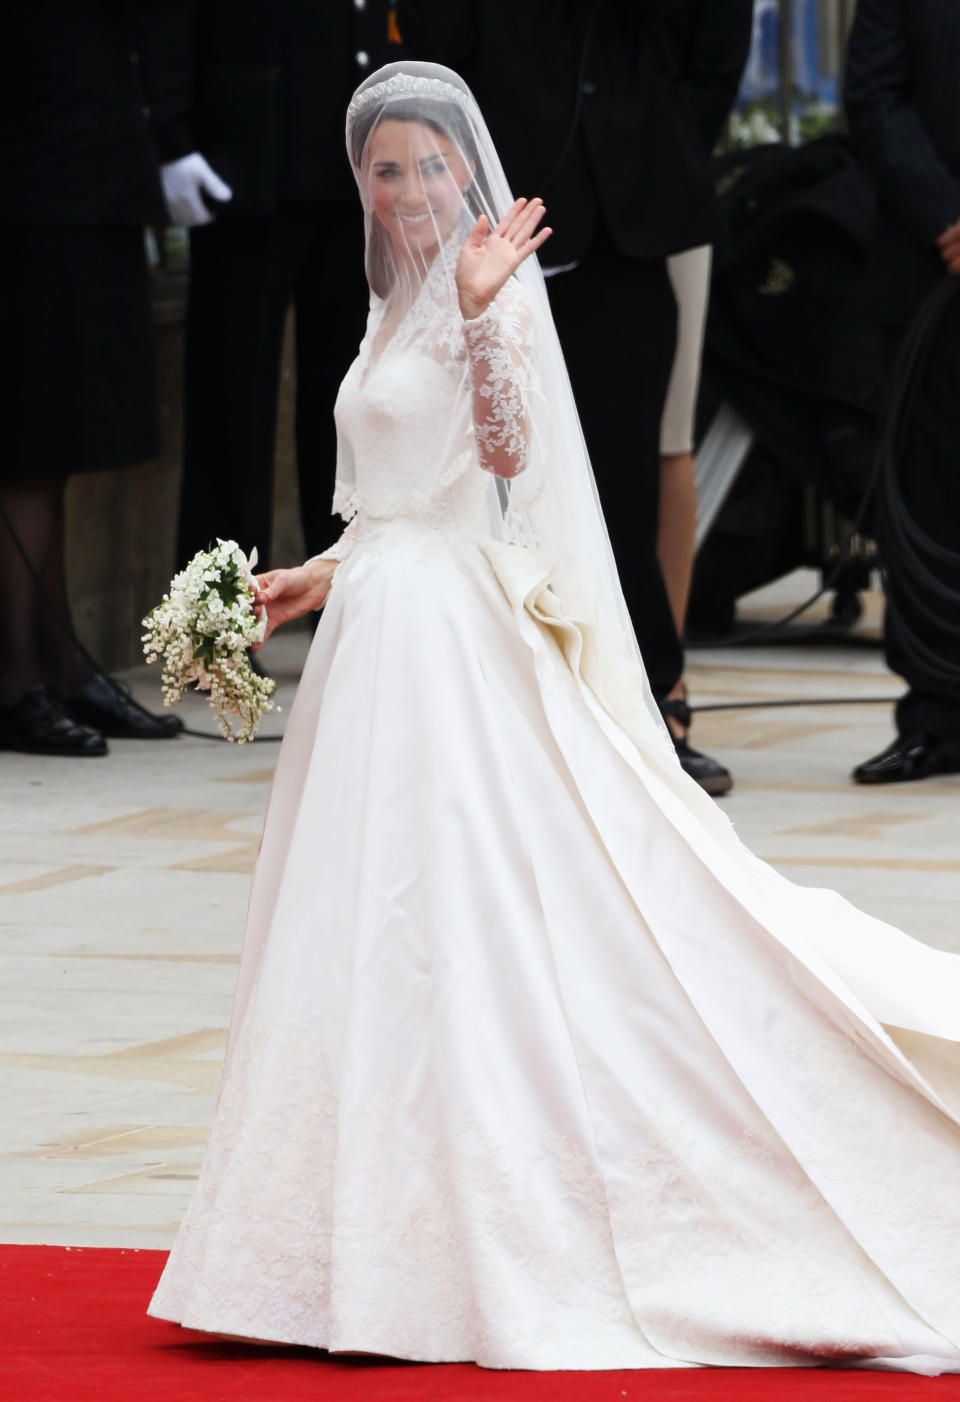 <p>For her big day, the Duchess of Cambridge opted for a lace gown designed by Alexander McQueen’s Sarah Burton. The floow-sweeping number incorporated lace, floral motifs and a seriously impressive train. It reportedly cost £250,000 and sparked a mass number of copies. <em>[Photo: Getty]</em> </p>